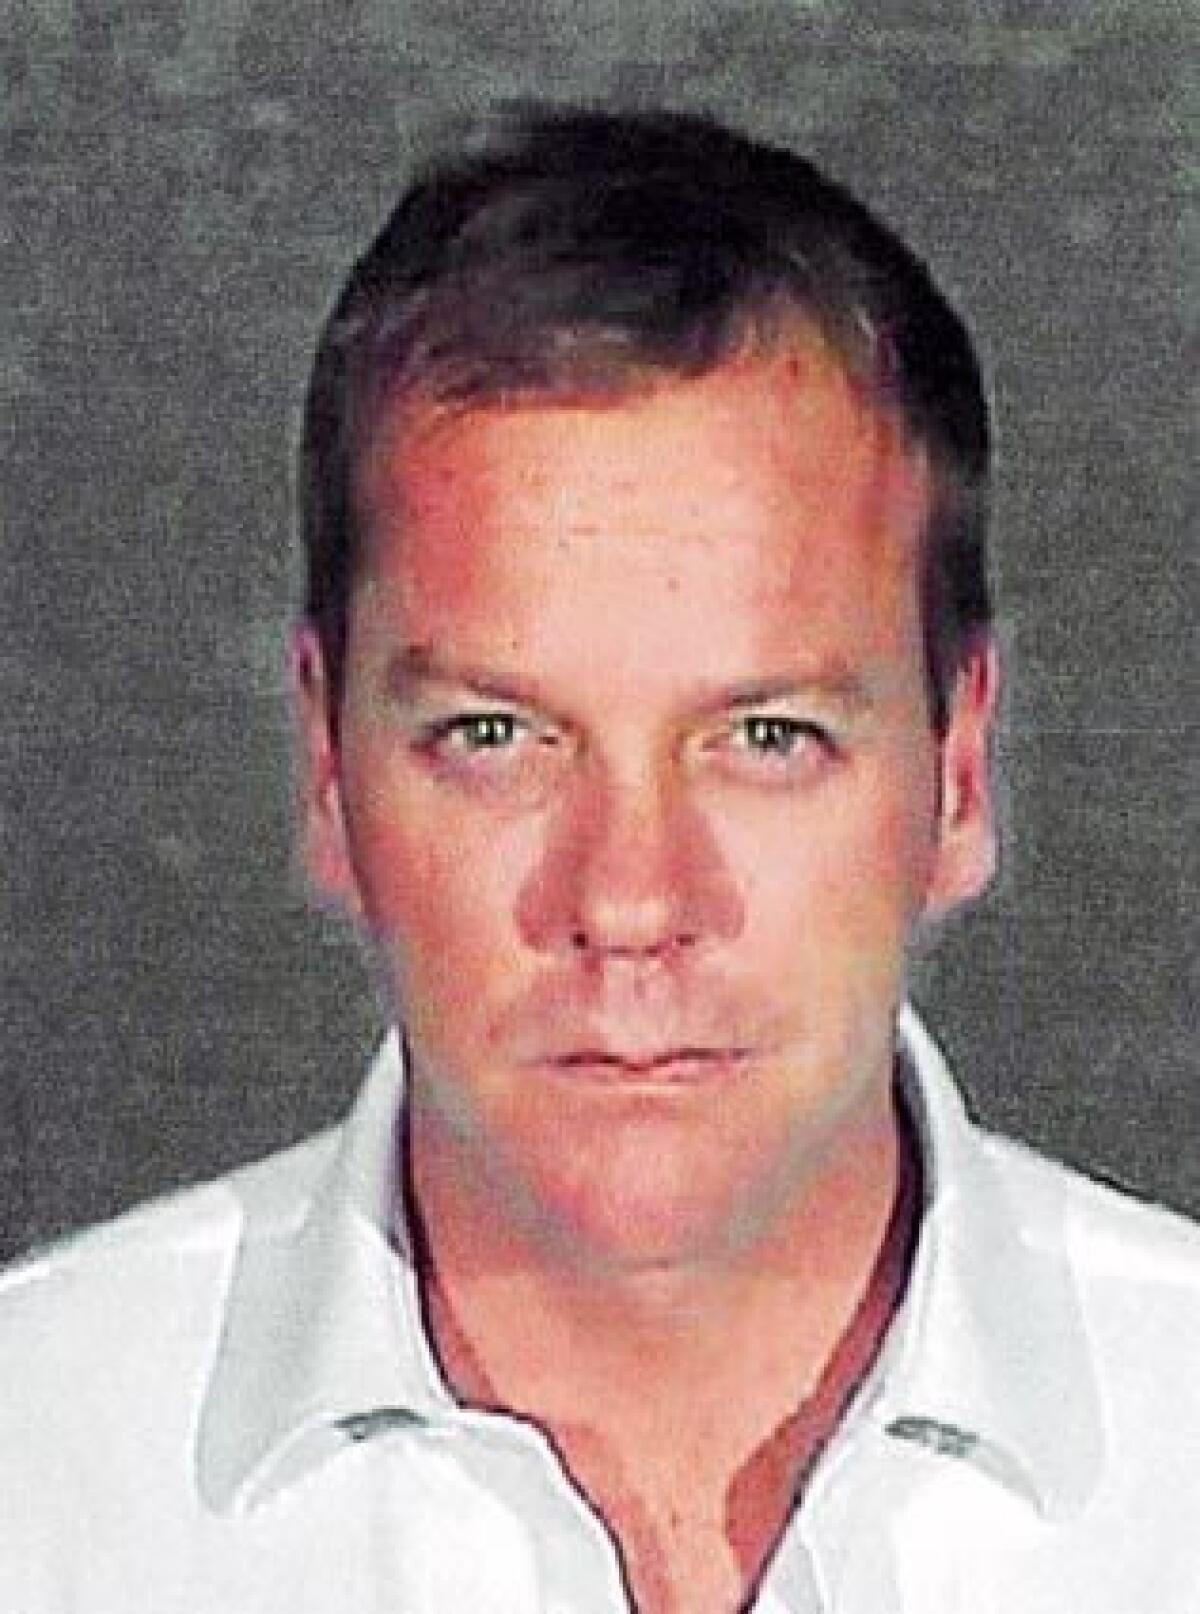 Kiefer Sutherland, shown in this police booking photo, was released from the Glendale jail after completing a 48-day drunken driving sentence.